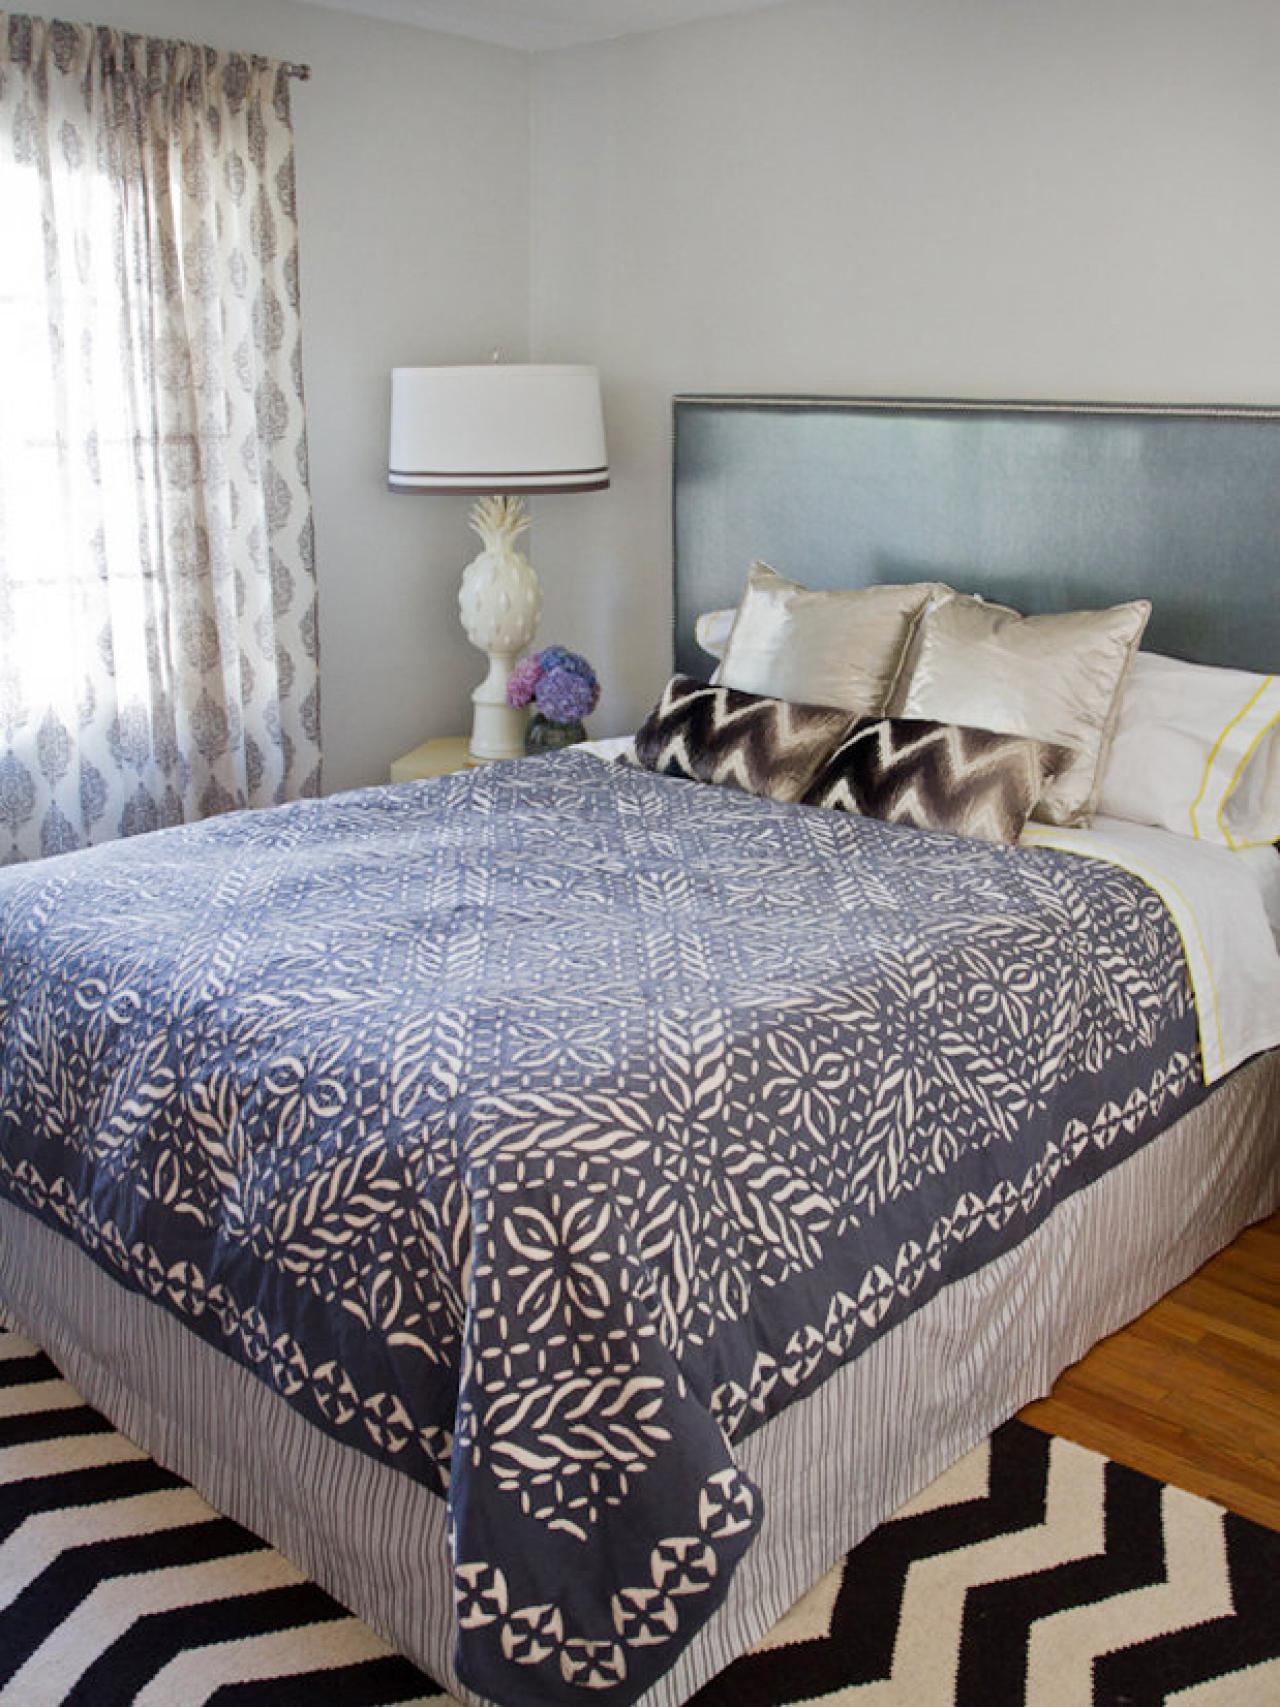 Turn A Coverlet Into Duvet Cover, How To Put A Comforter Into A Duvet Cover